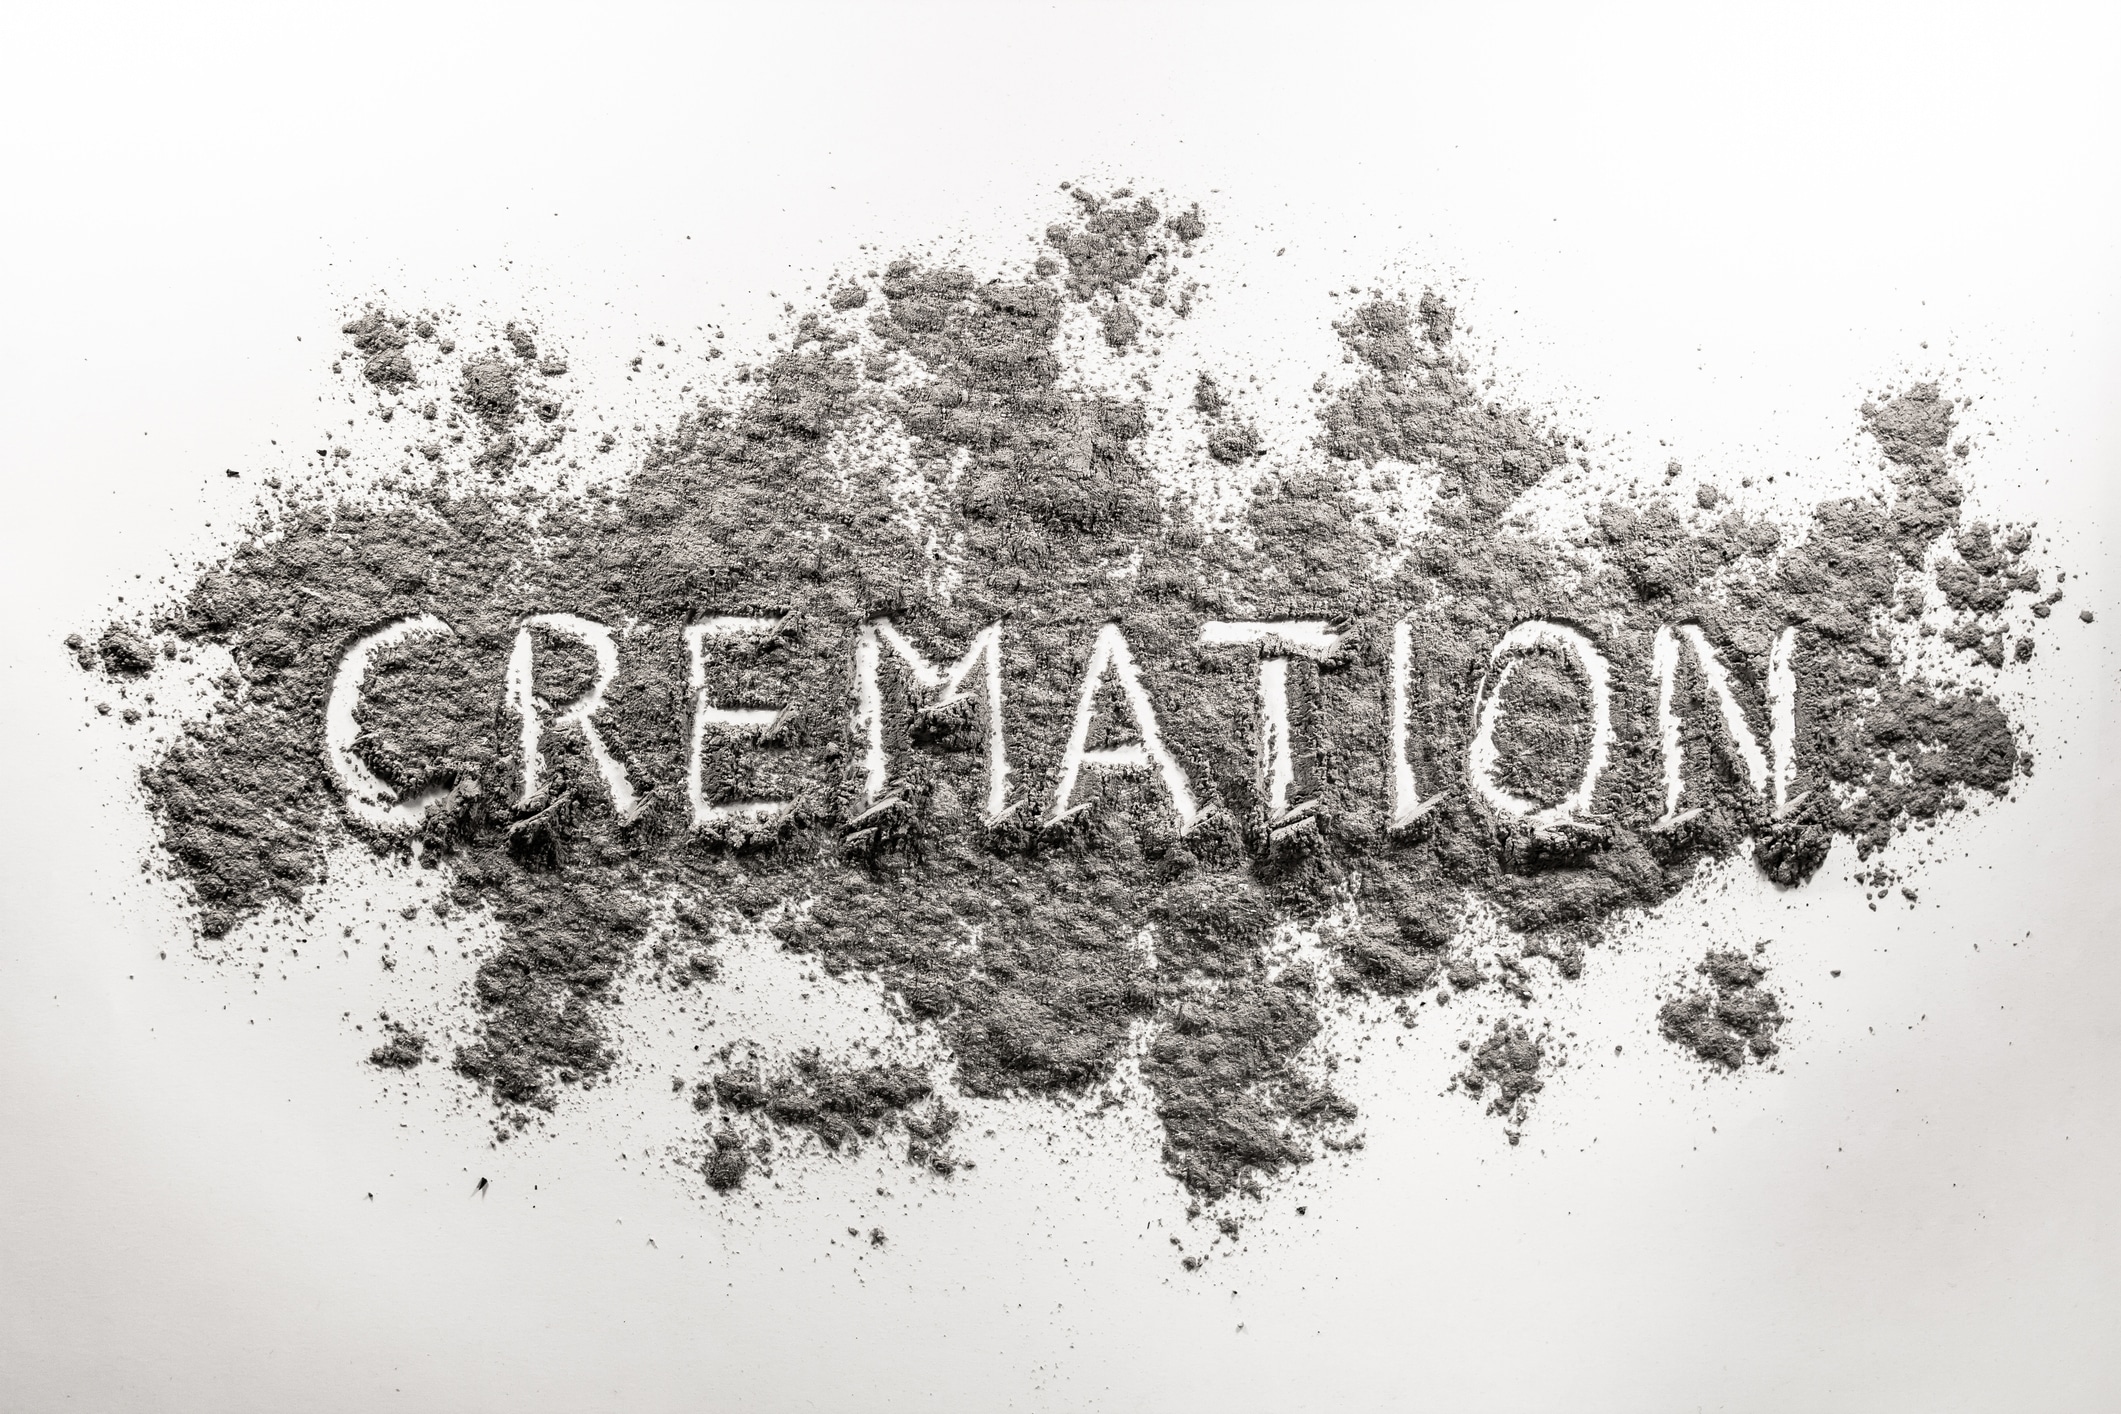 Burial or cremation